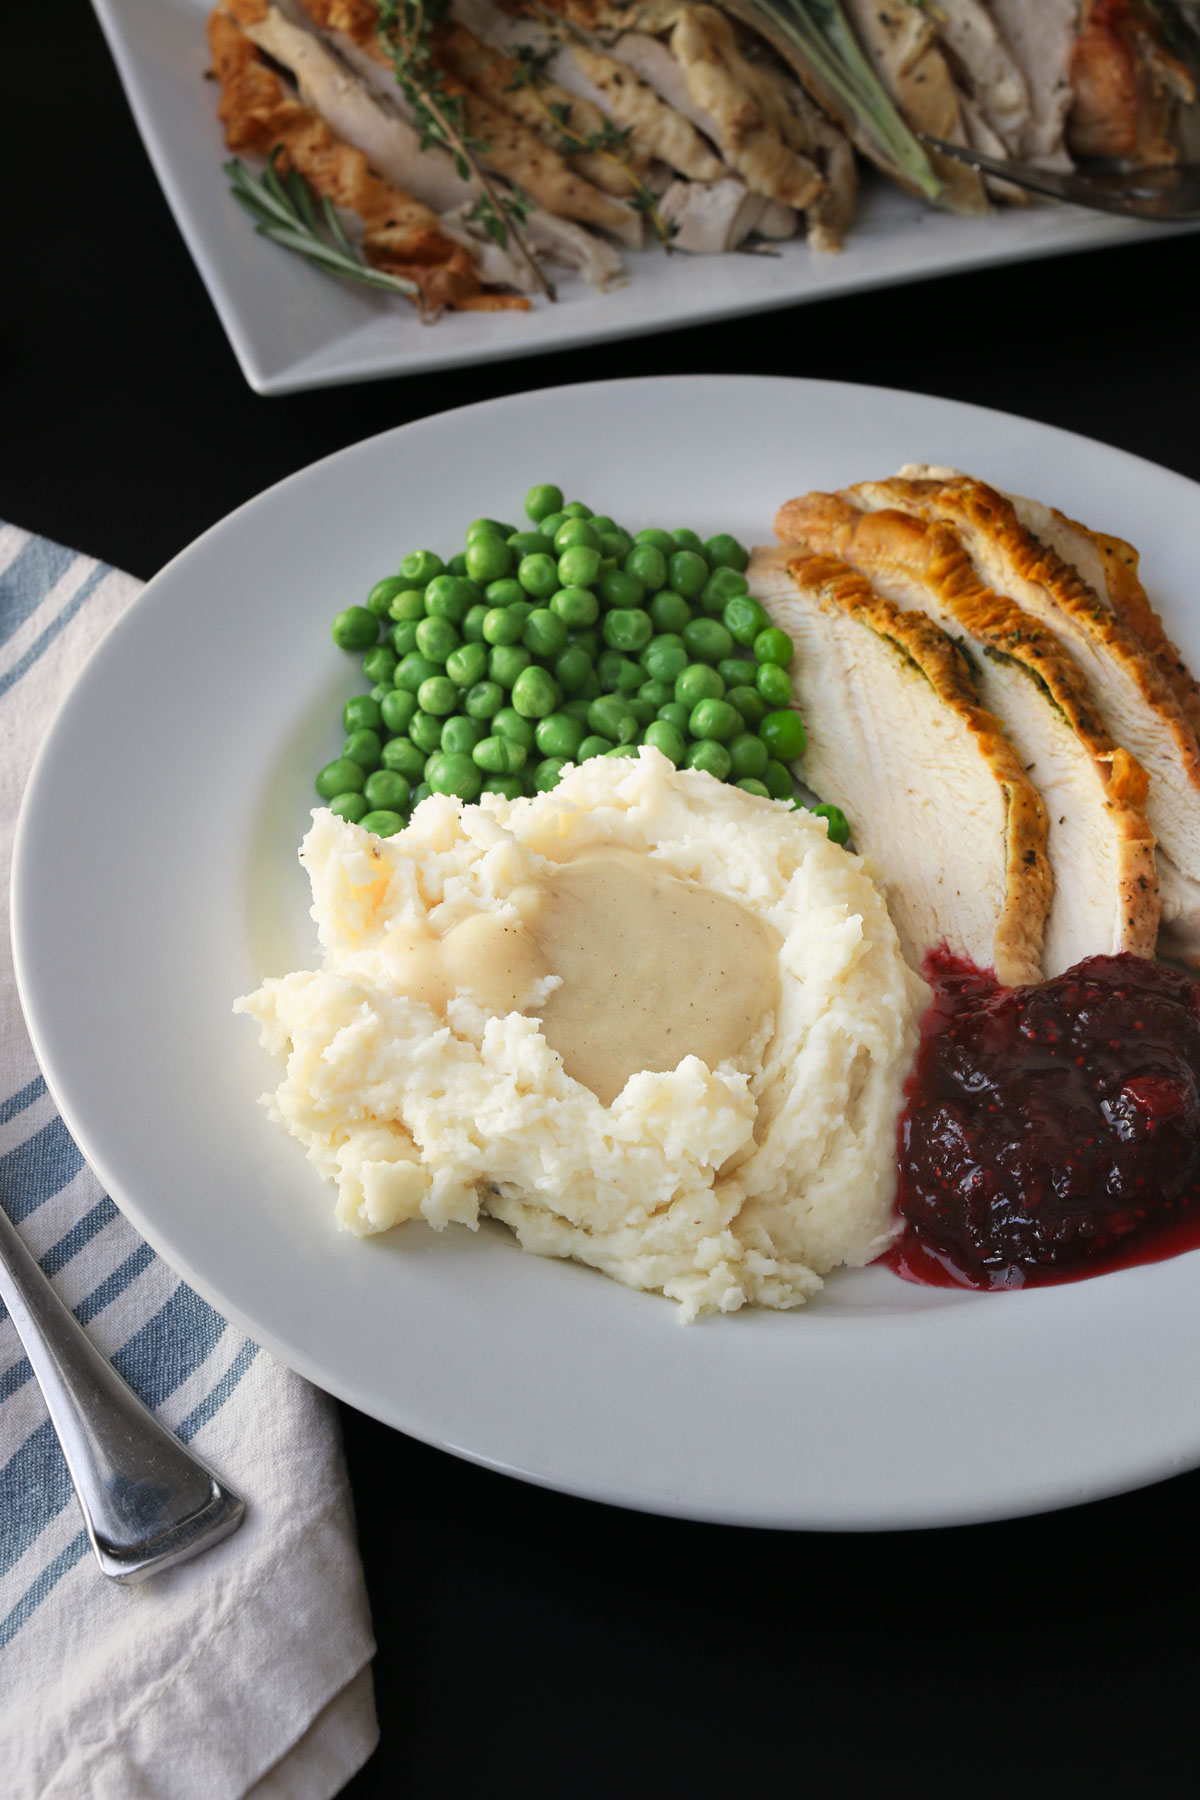 dinner plate with mashed potatoes, gravy, peas, roast turkey, and cranberry sauce.